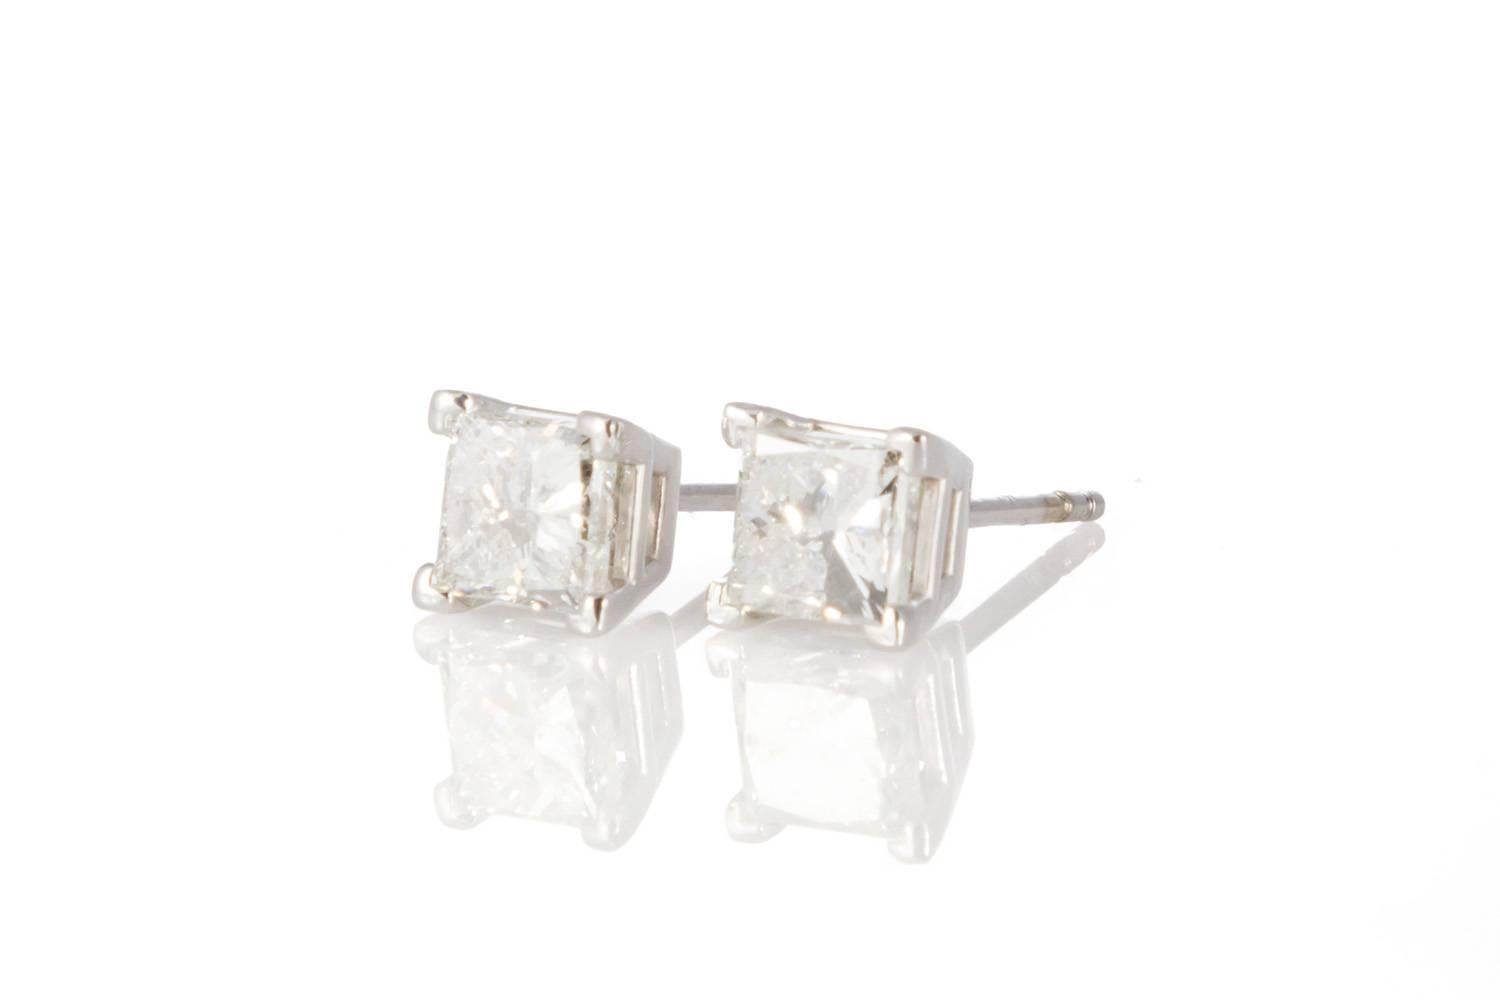 Ladies 14K White Gold & Princess Cut Diamond Stud Earrings. These beautiful earrings feature 1.64ctw G-H/I1 Princess Cut Diamonds set in 14k White Gold studs with slide back setting. The earrings are in very good condition and show very few